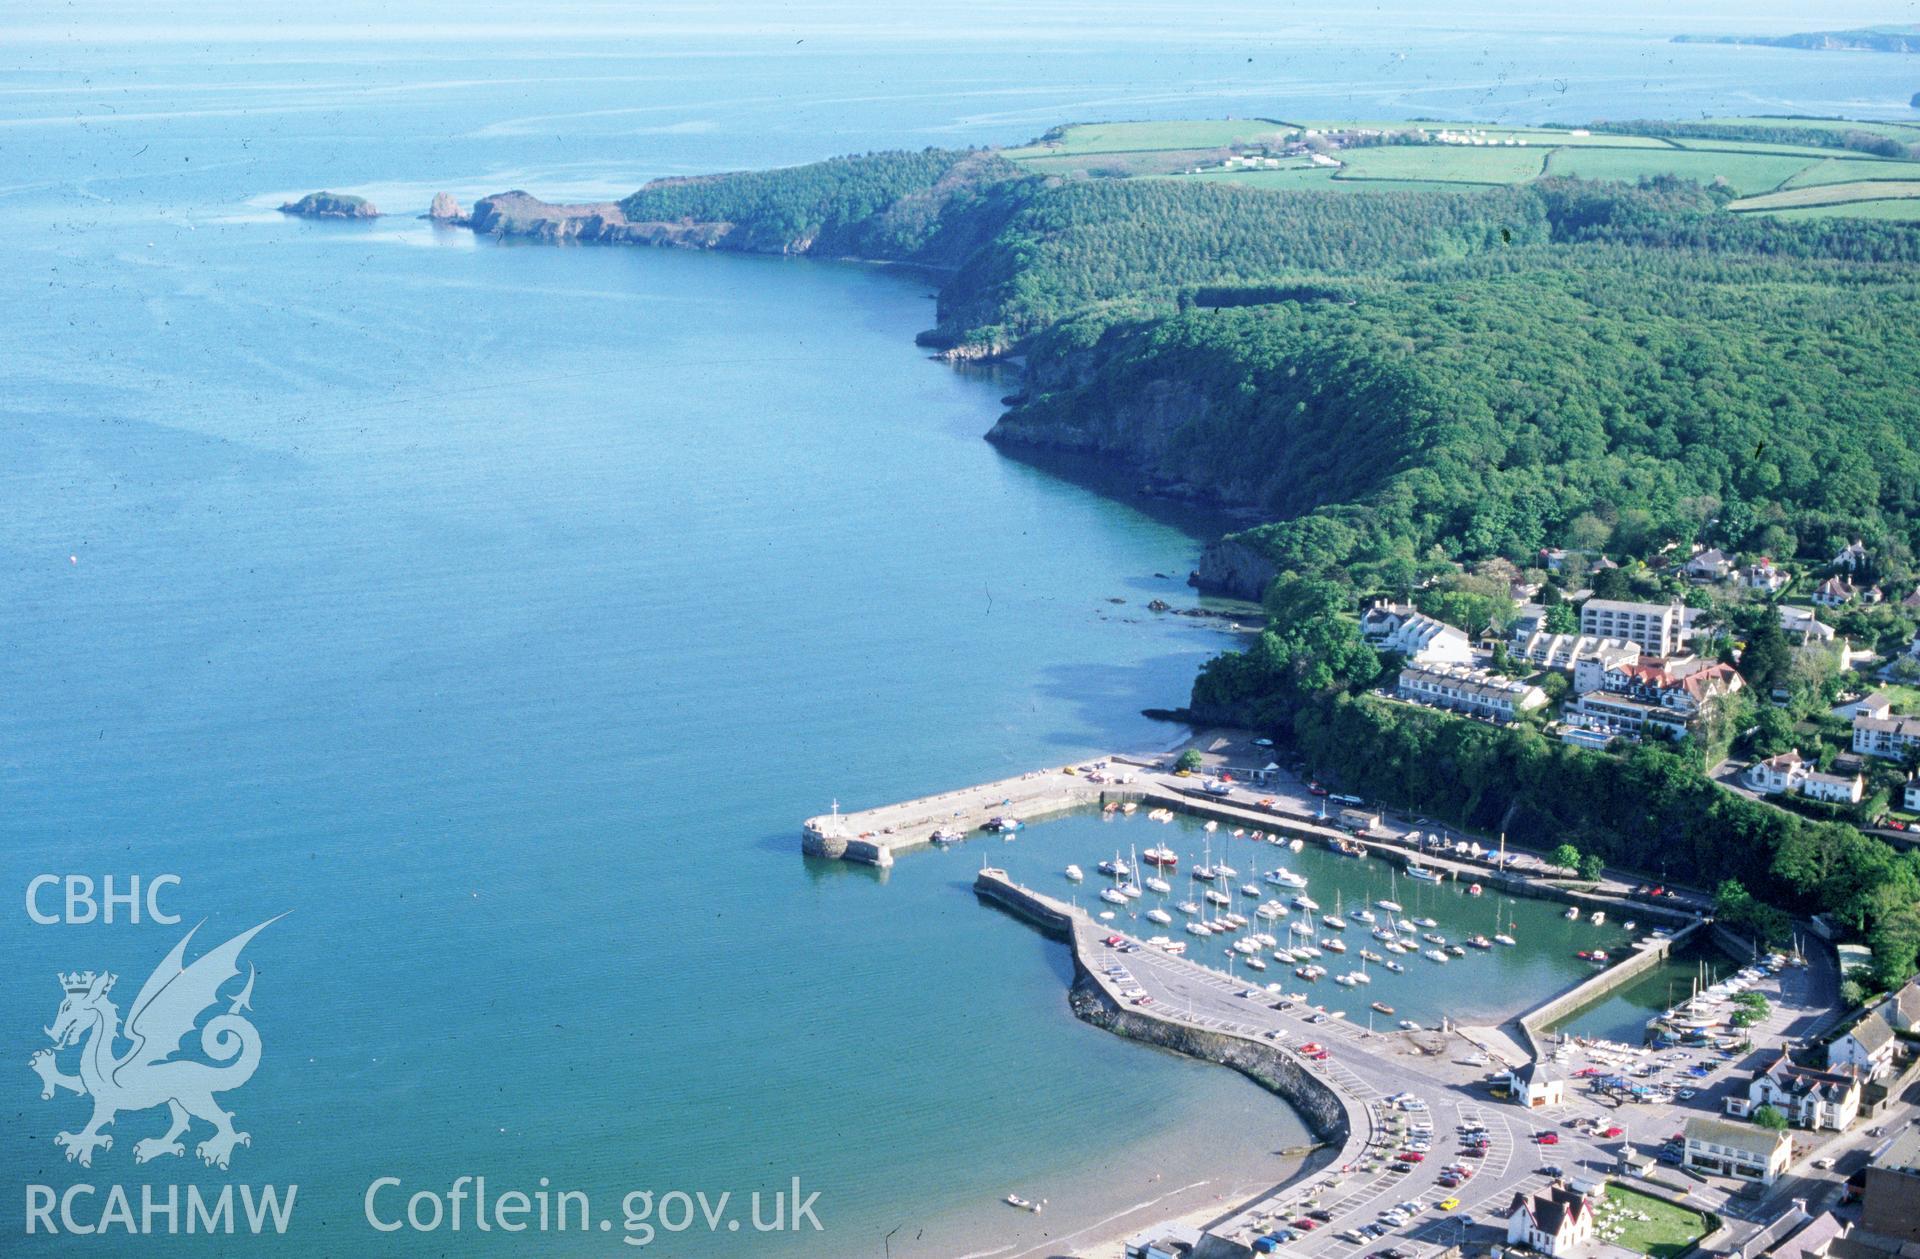 Slide of RCAHMW colour oblique aerial photograph of Saundersfoot Harbour, taken by C.R. Musson, 18/5/1989.